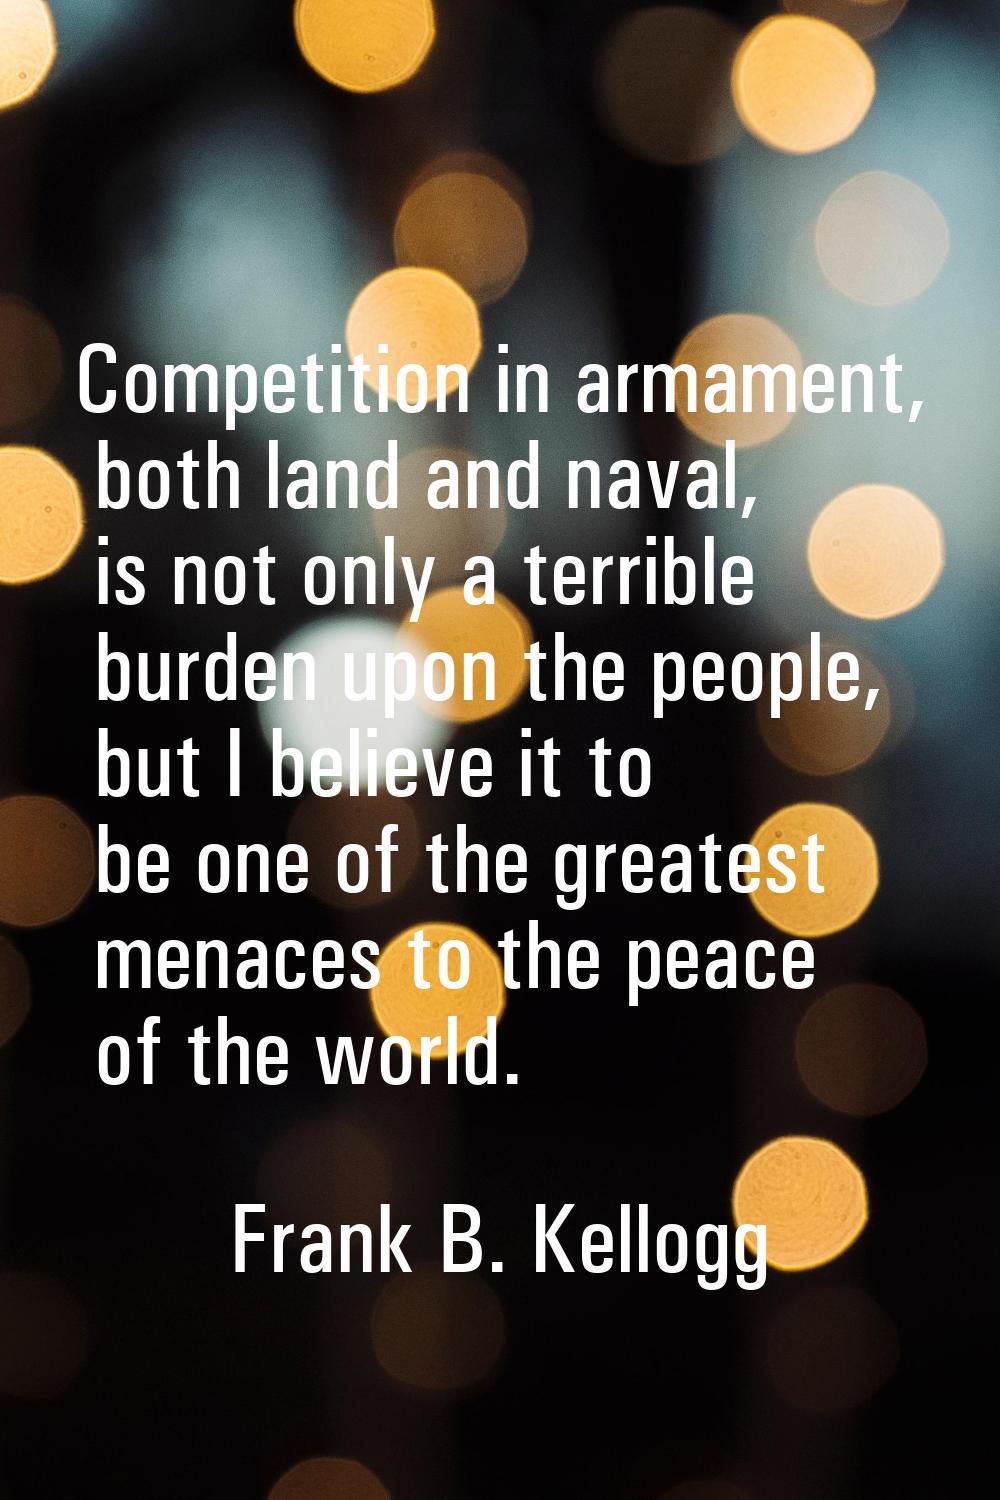 Competition in armament, both land and naval, is not only a terrible burden upon the people, but I 